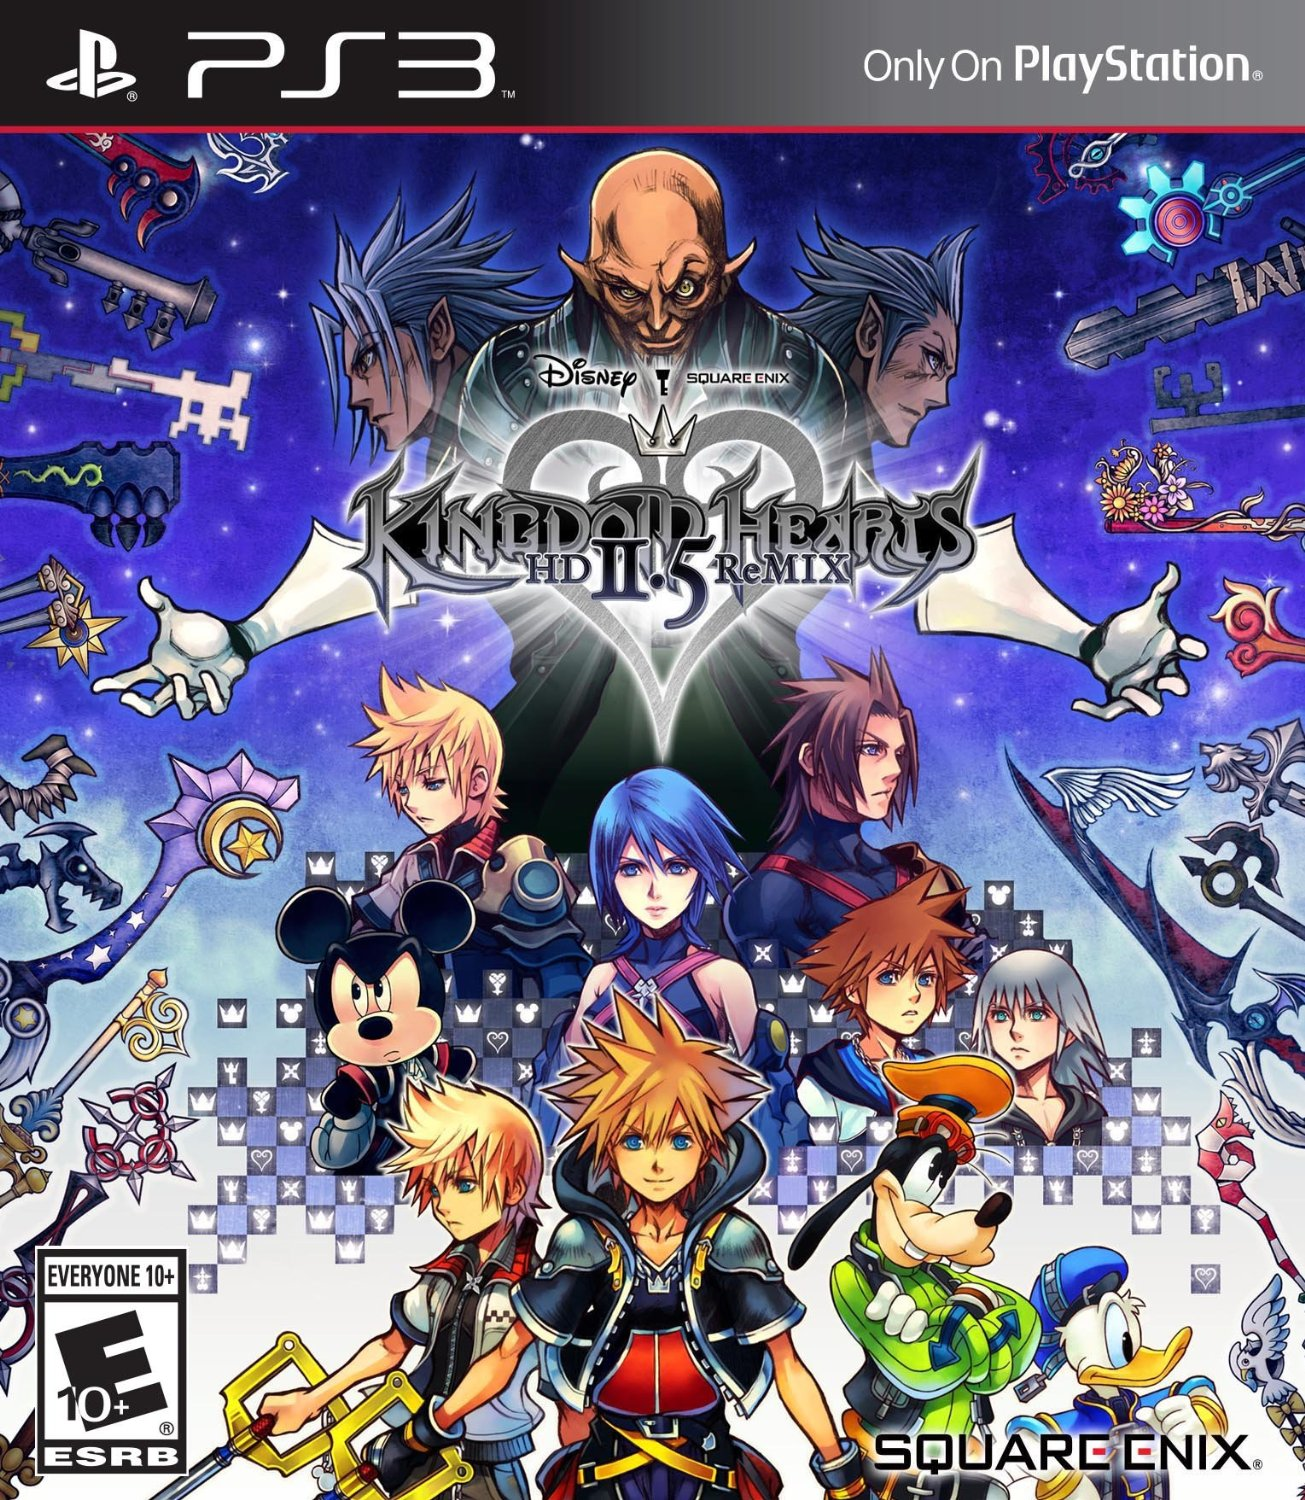 PS4 1080p 60fps] KINGDOM HEARTS All-in-One Package (All KH Games Full  Gameplay - No Commentary) 